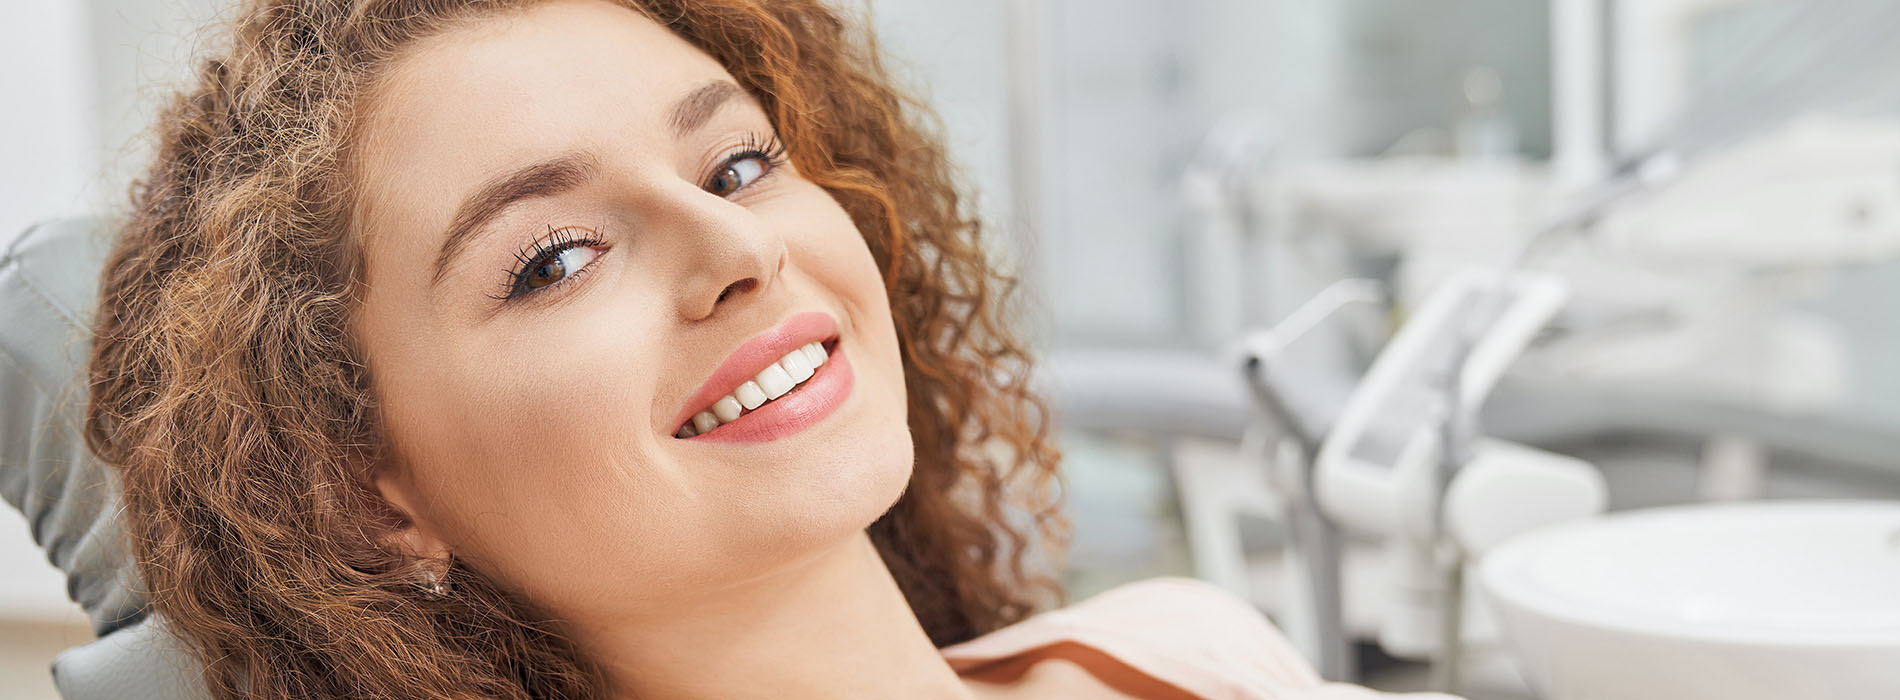 Remmers Dental | Emergency Treatment, Sedation Dentistry and Ceramic Crowns